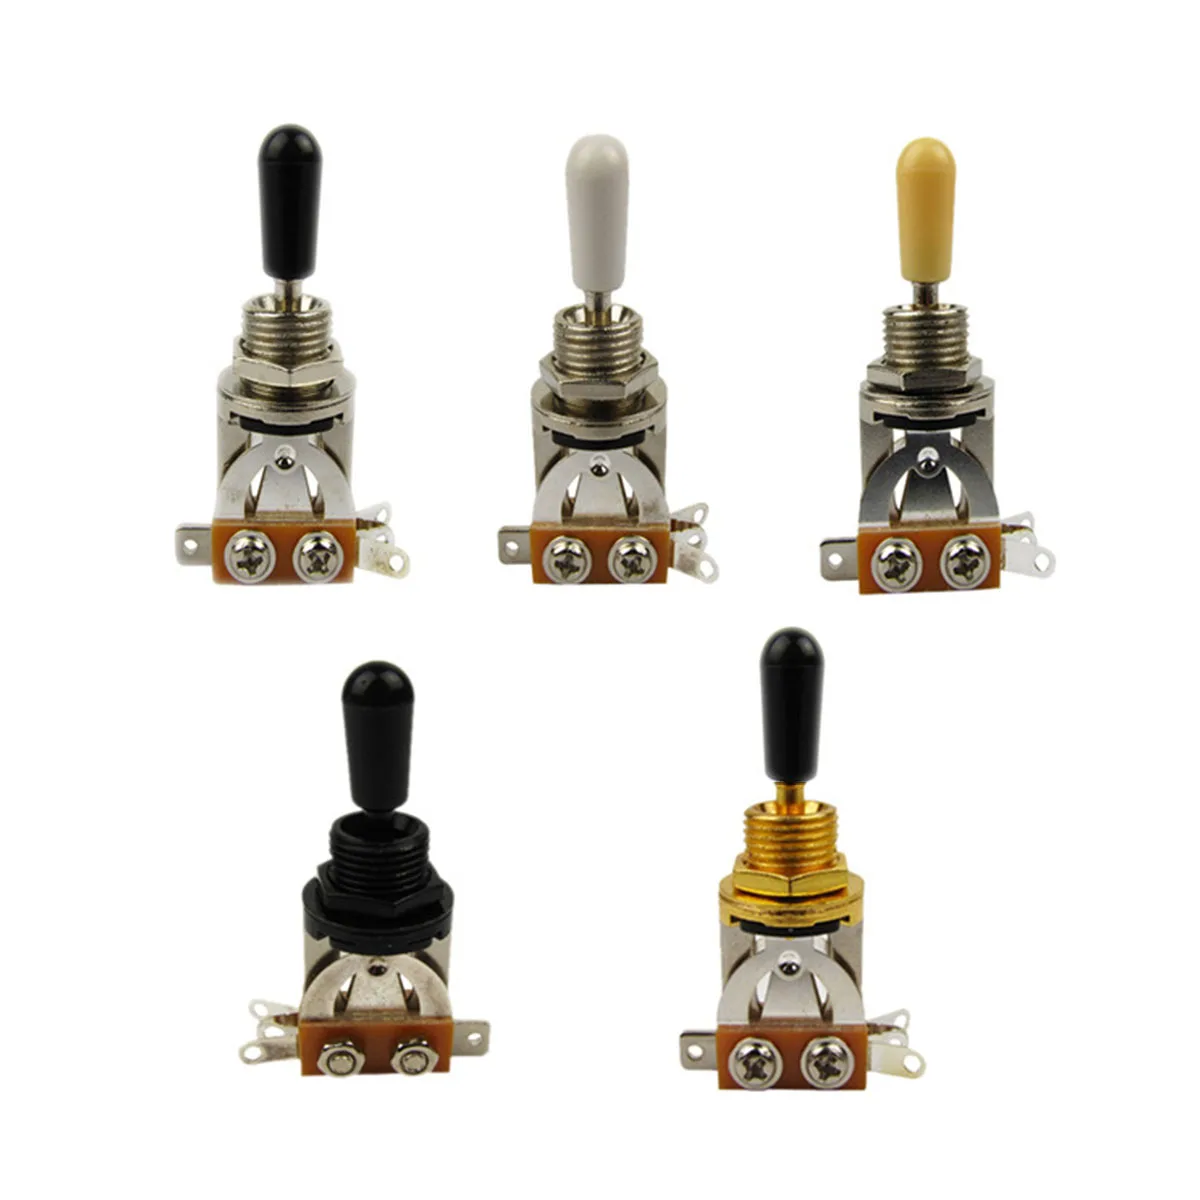 3 Way Toggle Switch kit for Gibson Epiphone Les Paul / LP Electric Guitar Chrome/Black/Gold Guitar Selector Pickup Toggle Switch